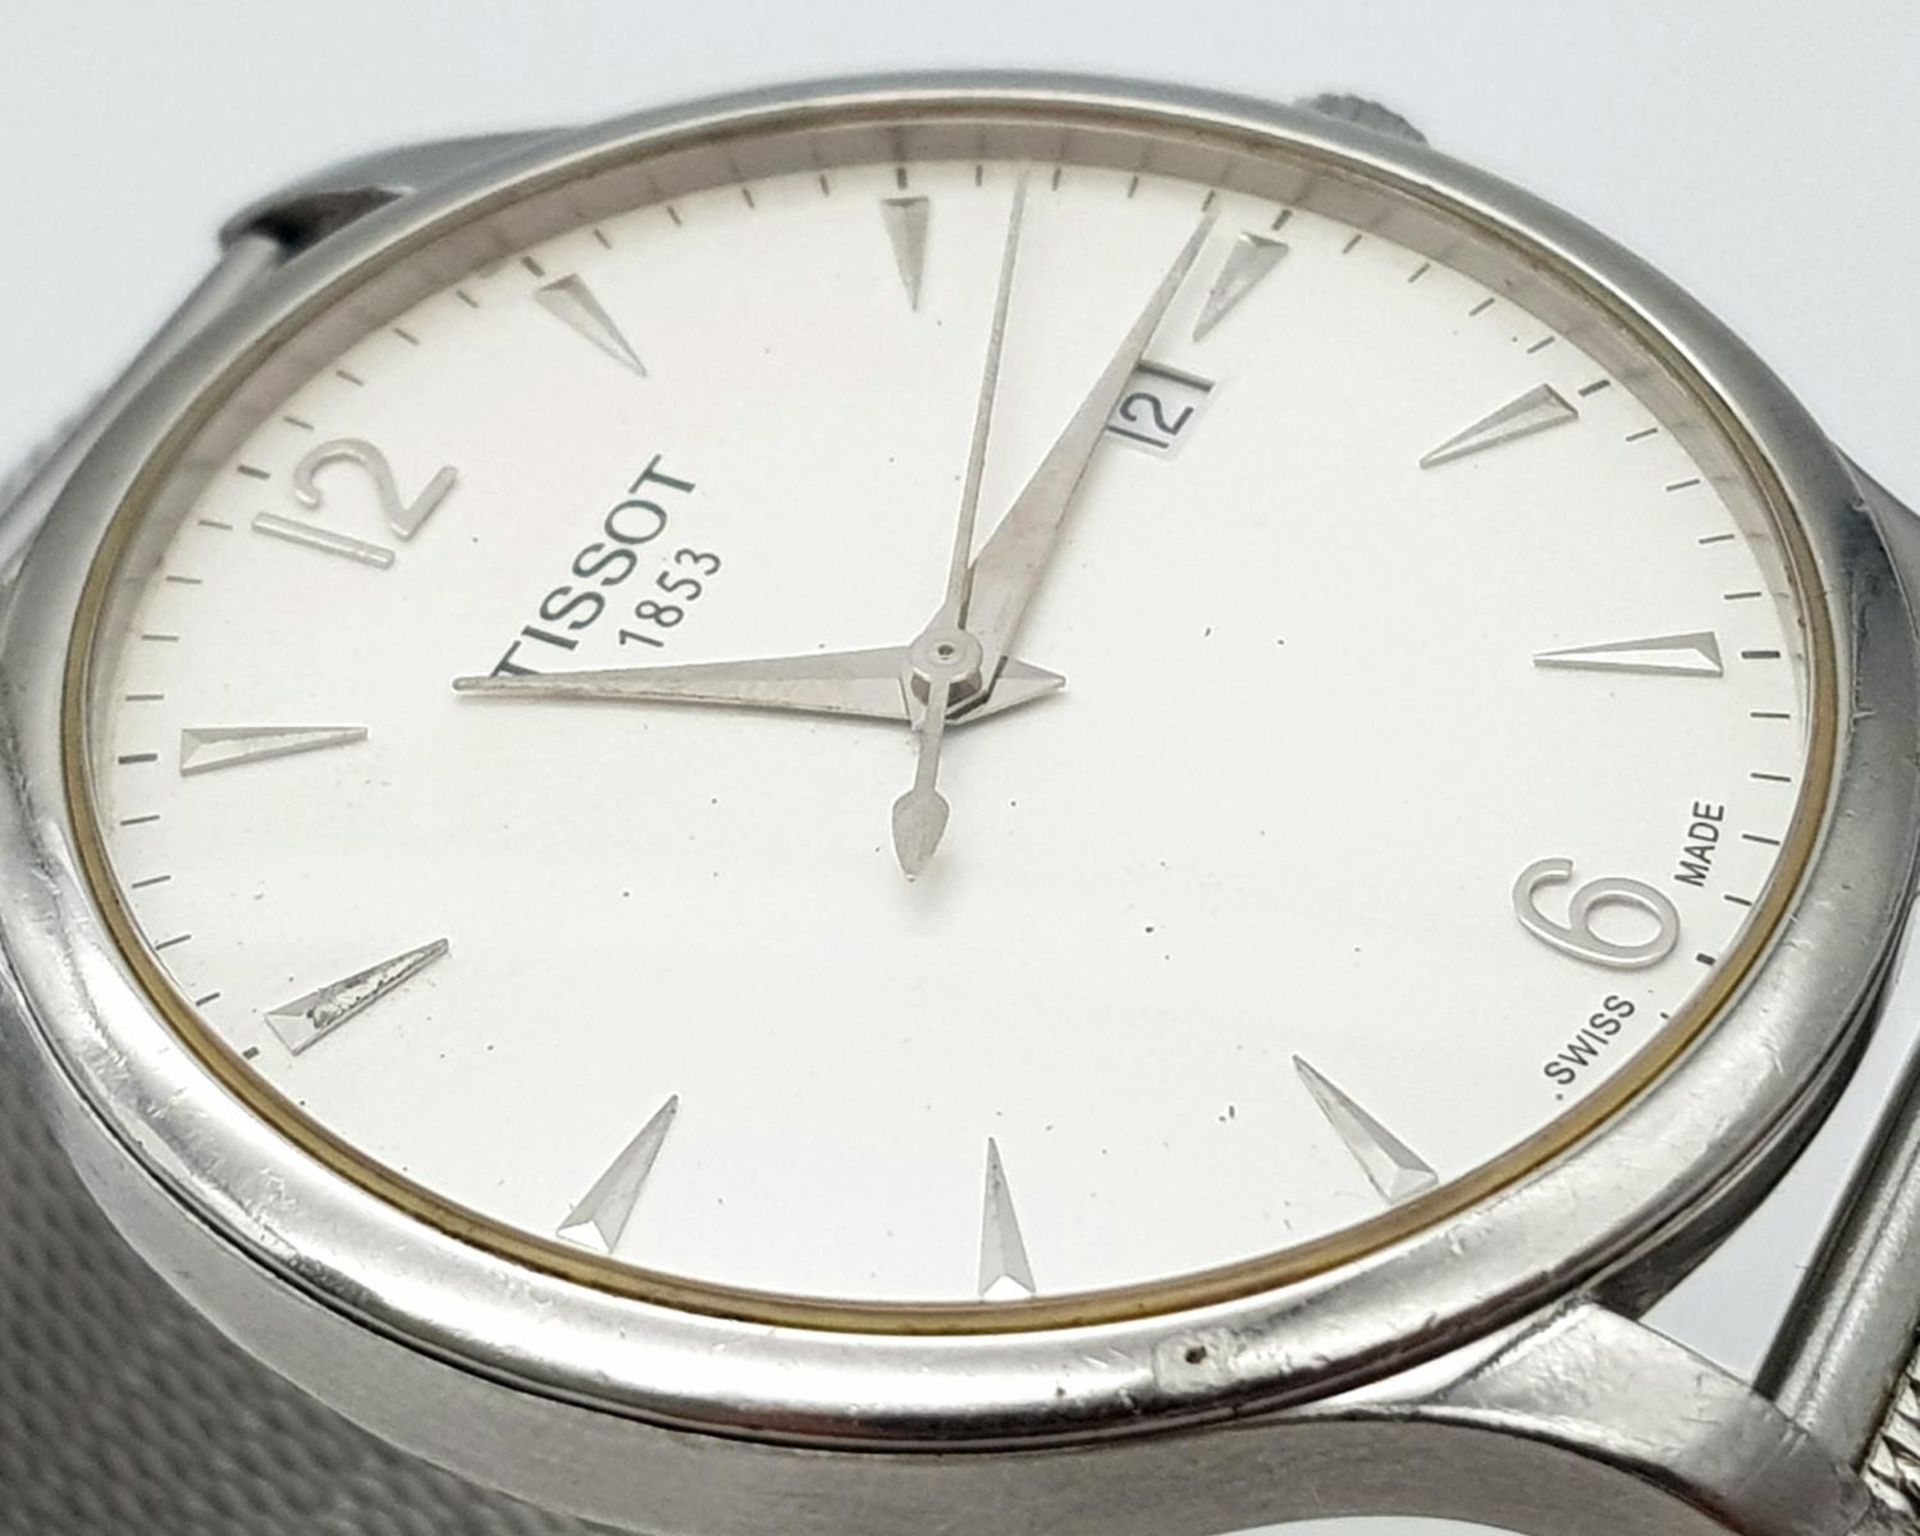 A Large Tissot Quartz Gents Watch. Stainless steel bracelet and case - 42mm. White dial with date - Bild 3 aus 6